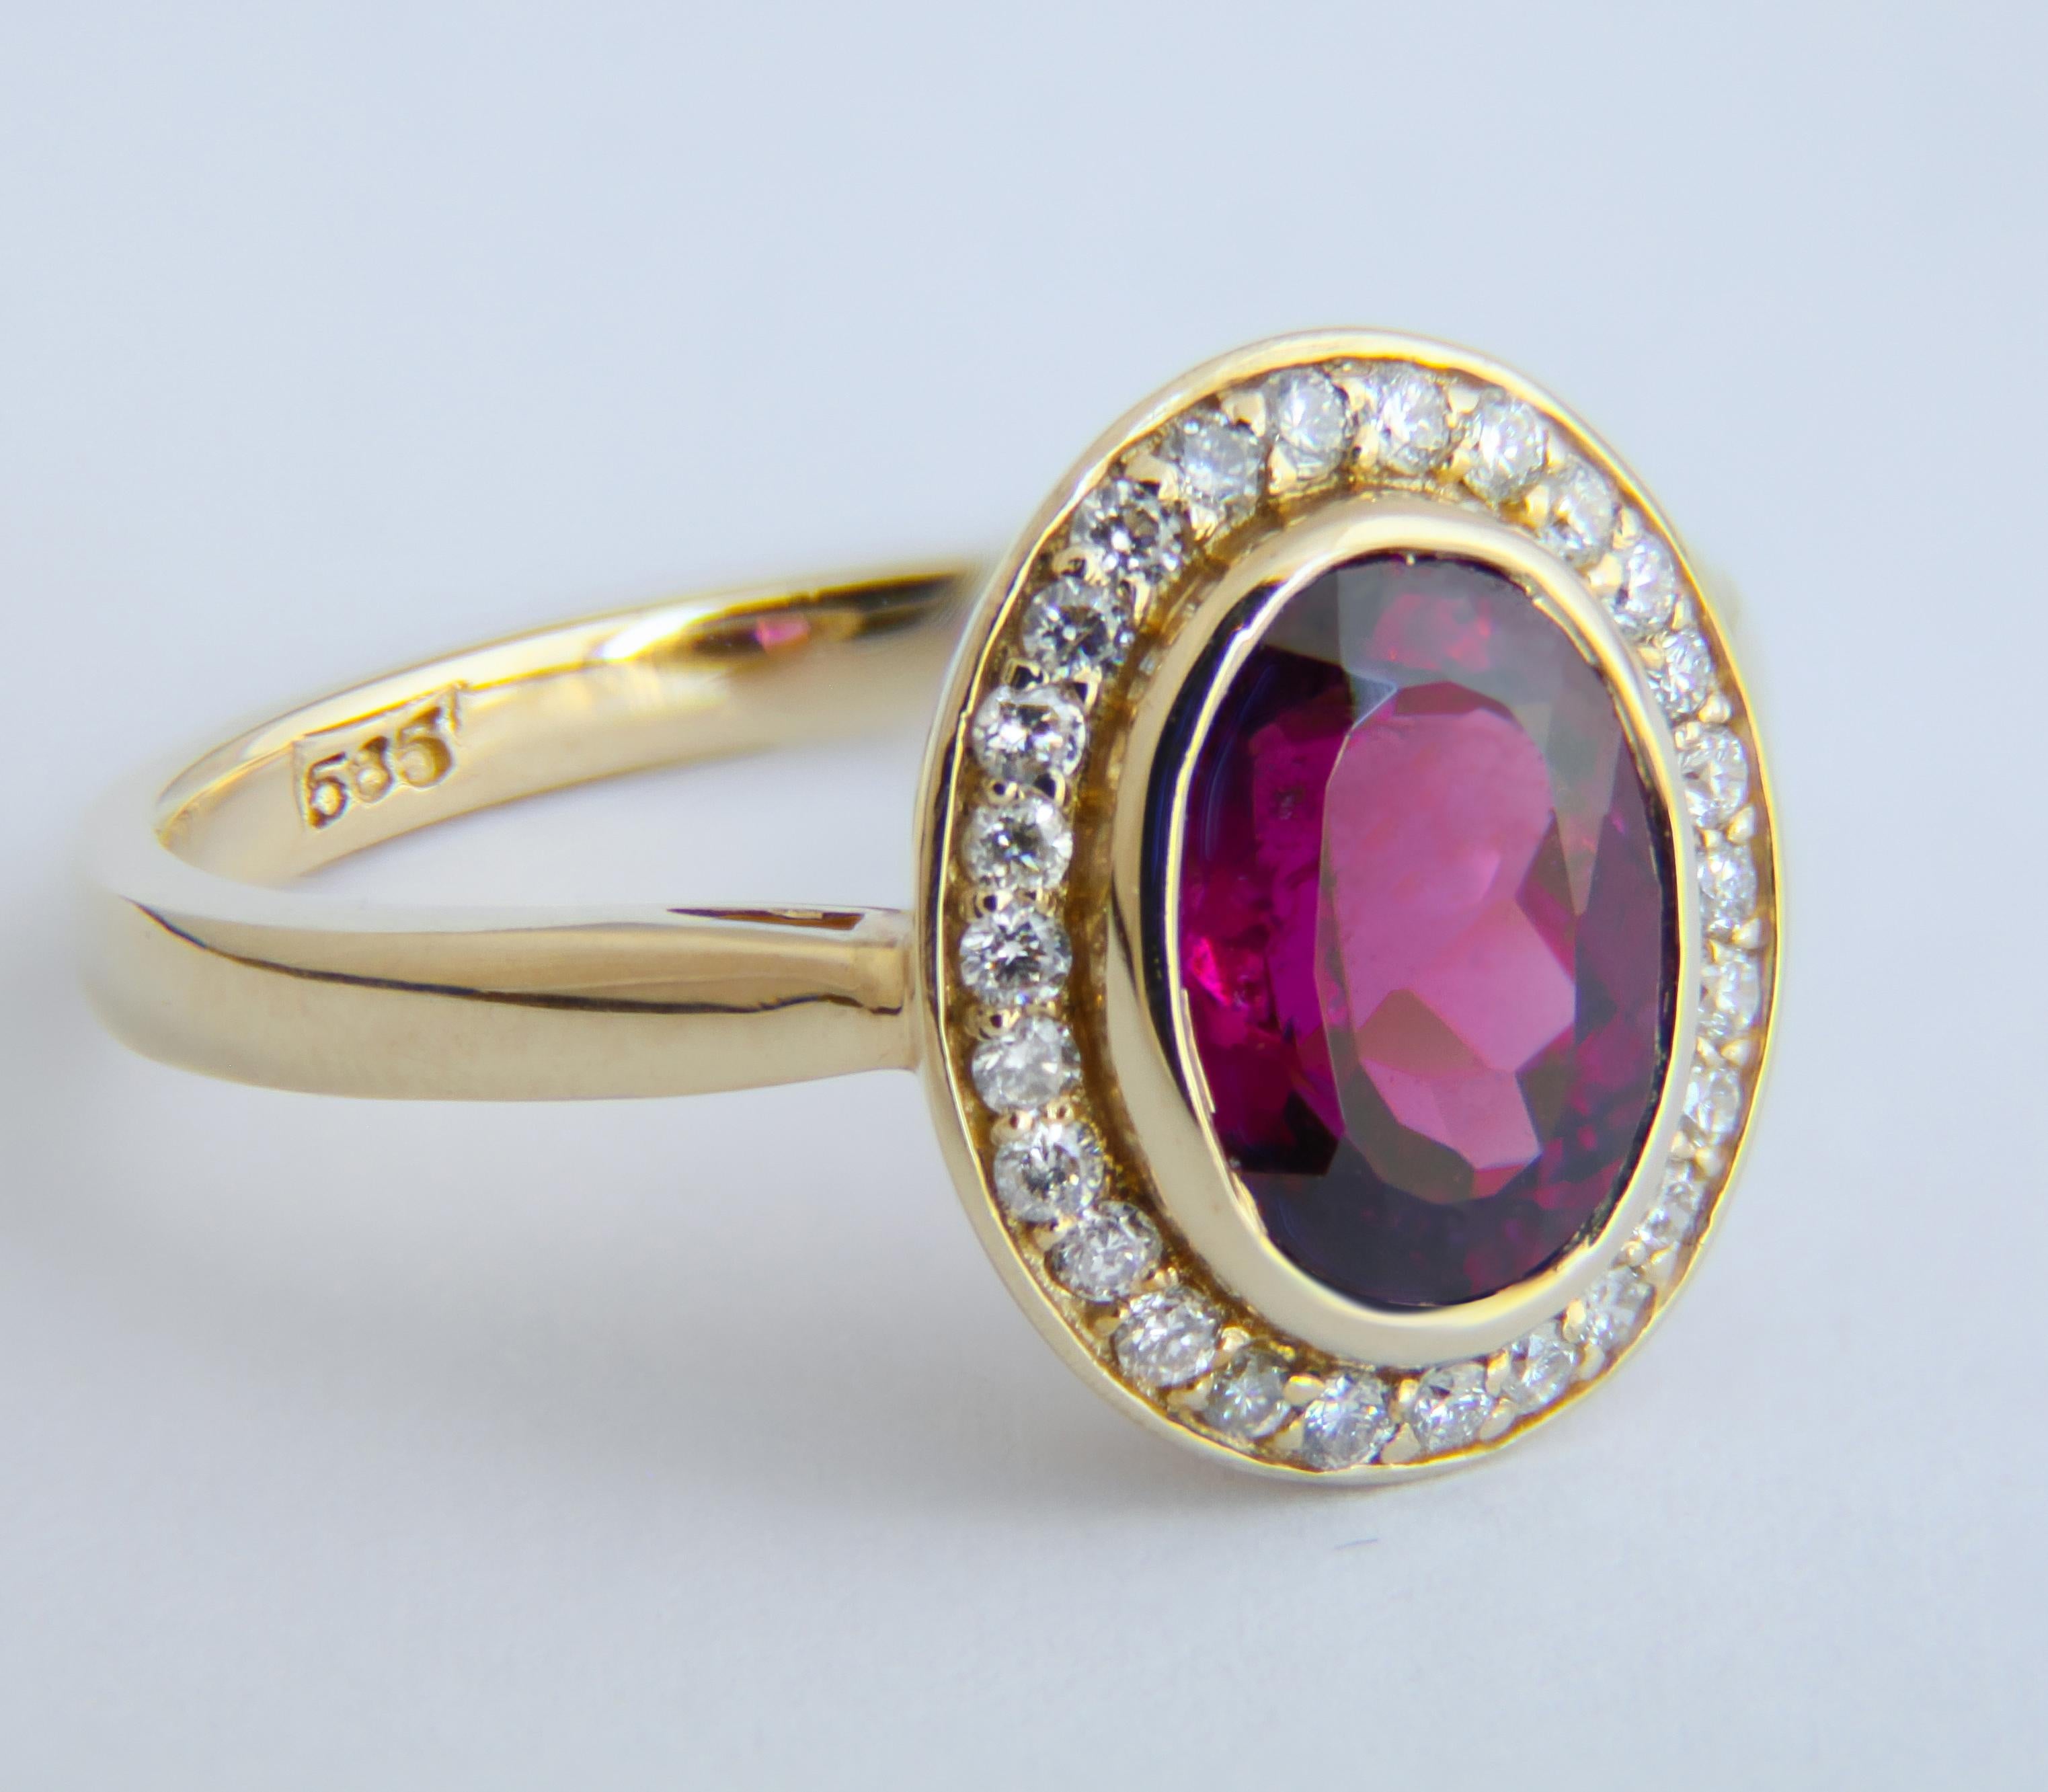 For Sale:  Garnet and diamonds 14k gold ring. 6